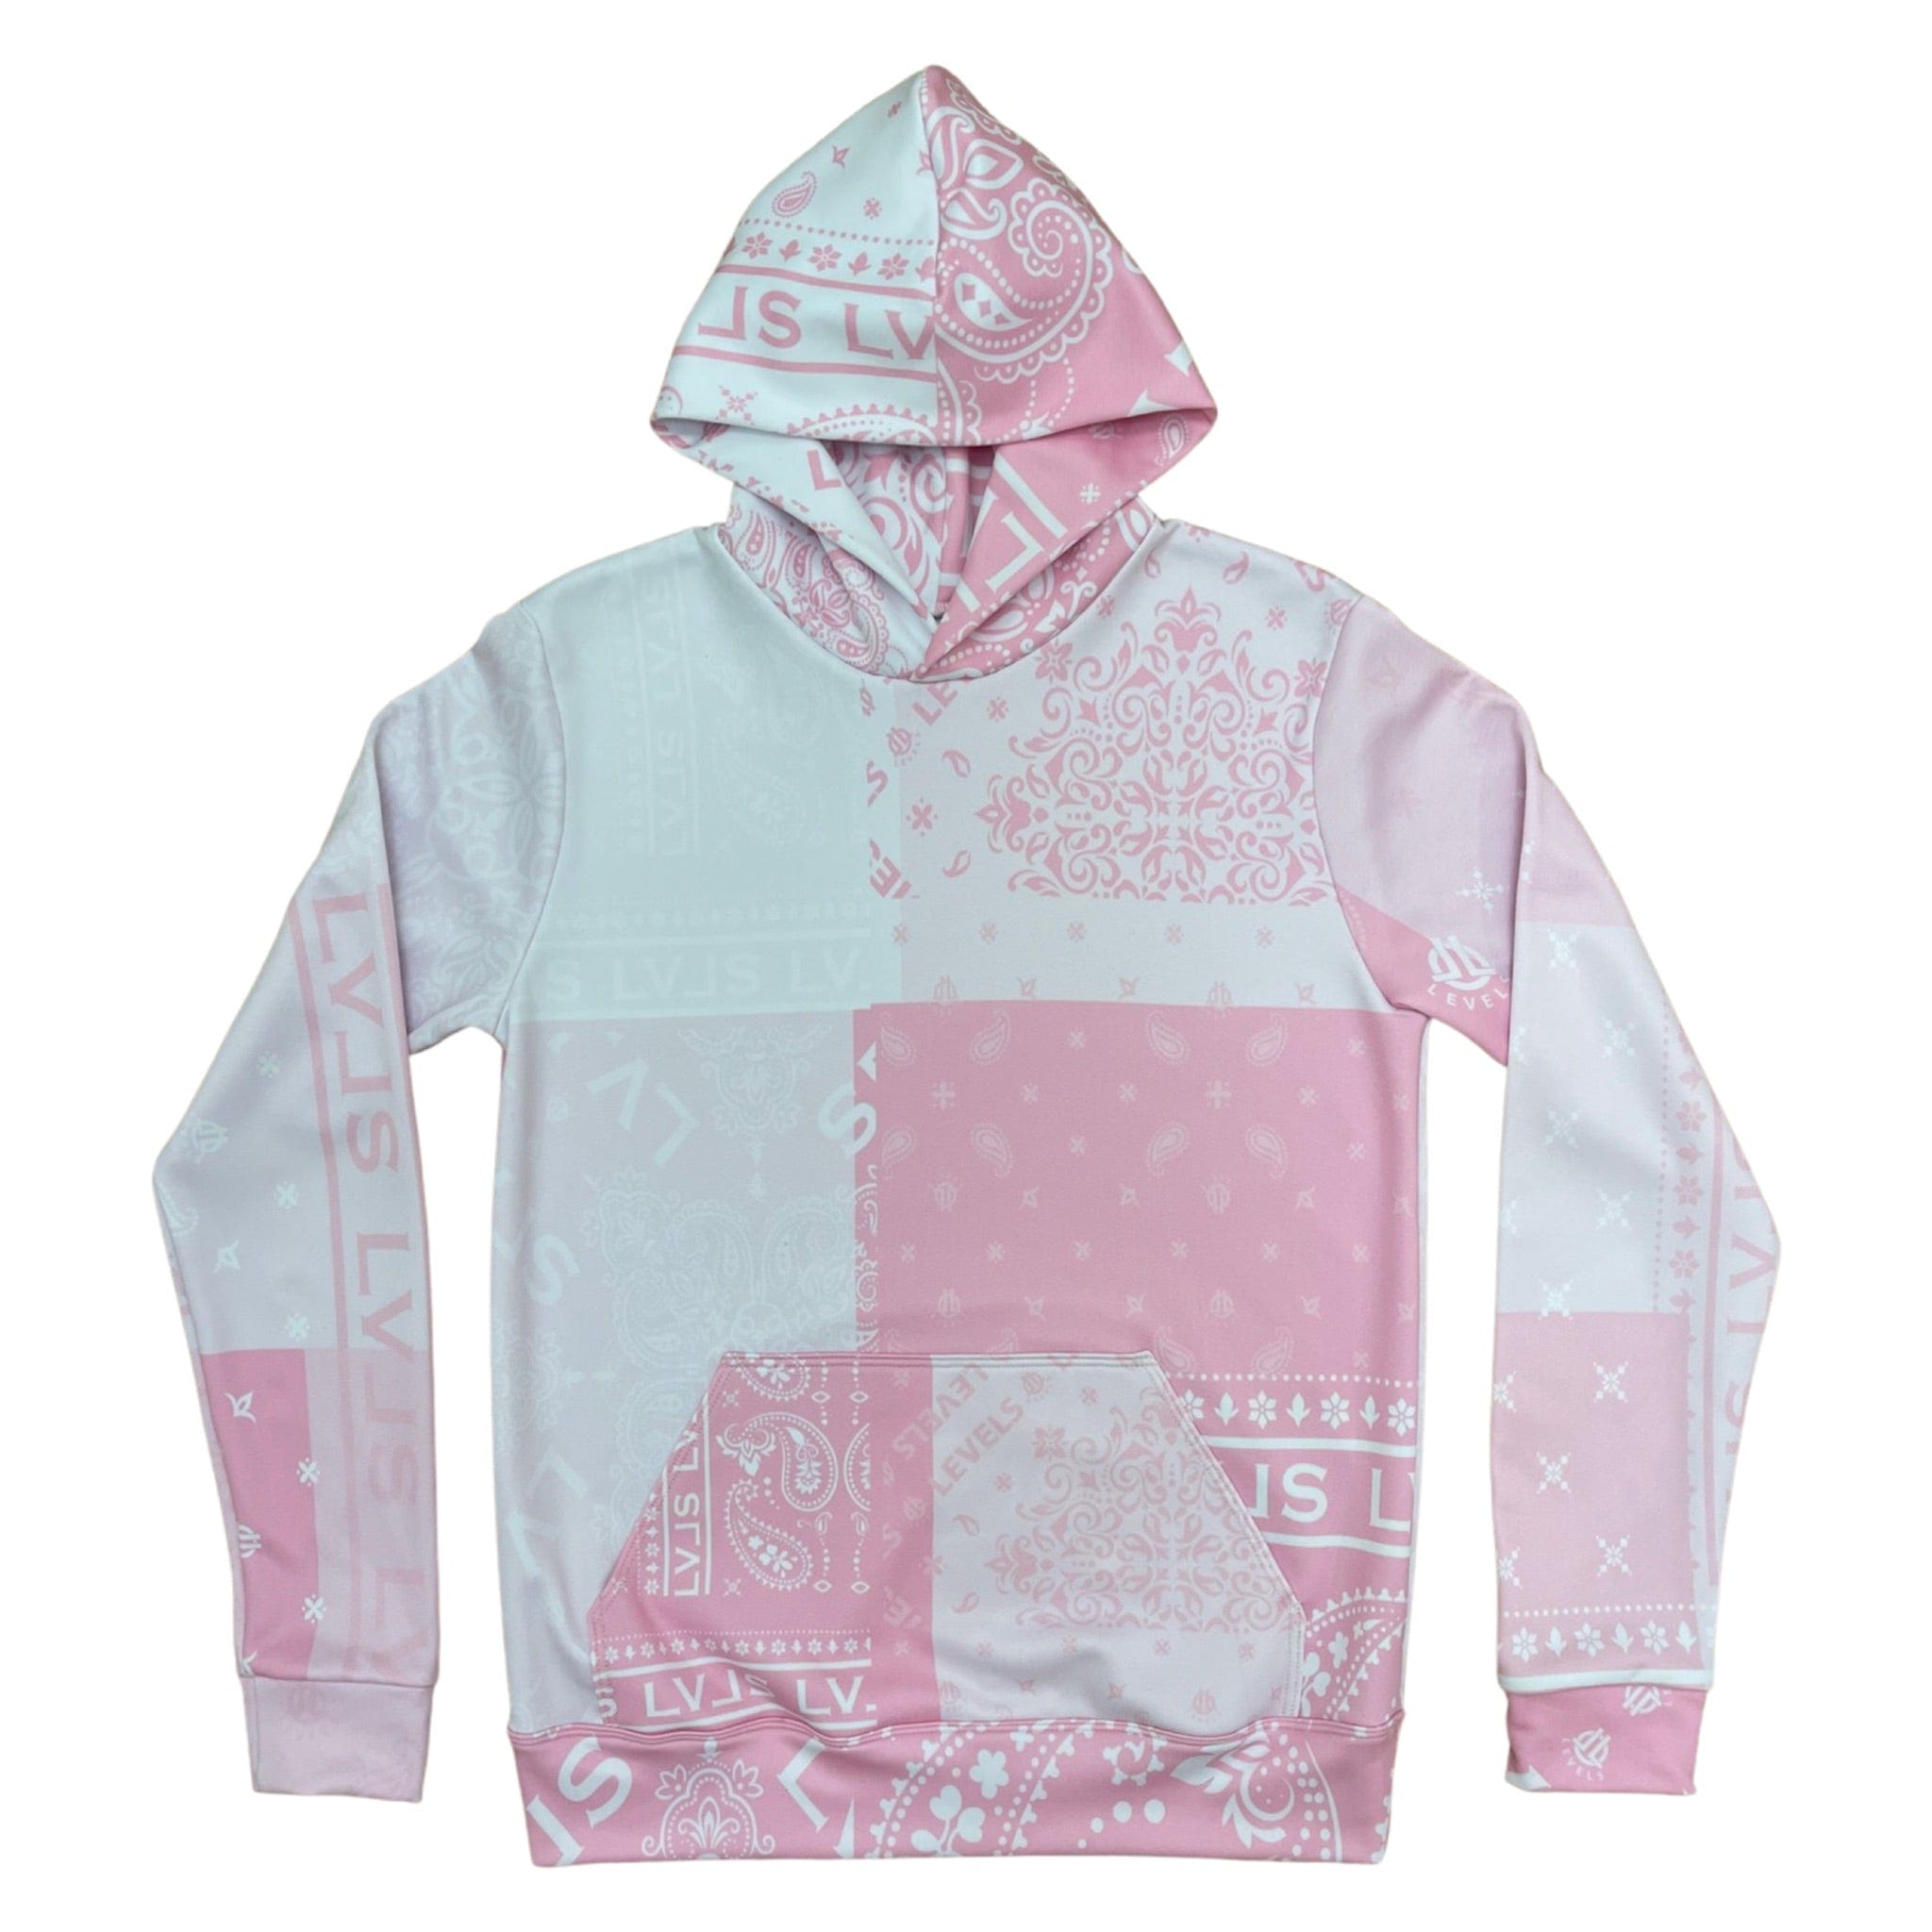 LEVELS, LLC Apparel & Accessories LEVELS SIGNATURE HOODIE (PINK PAISLEY)